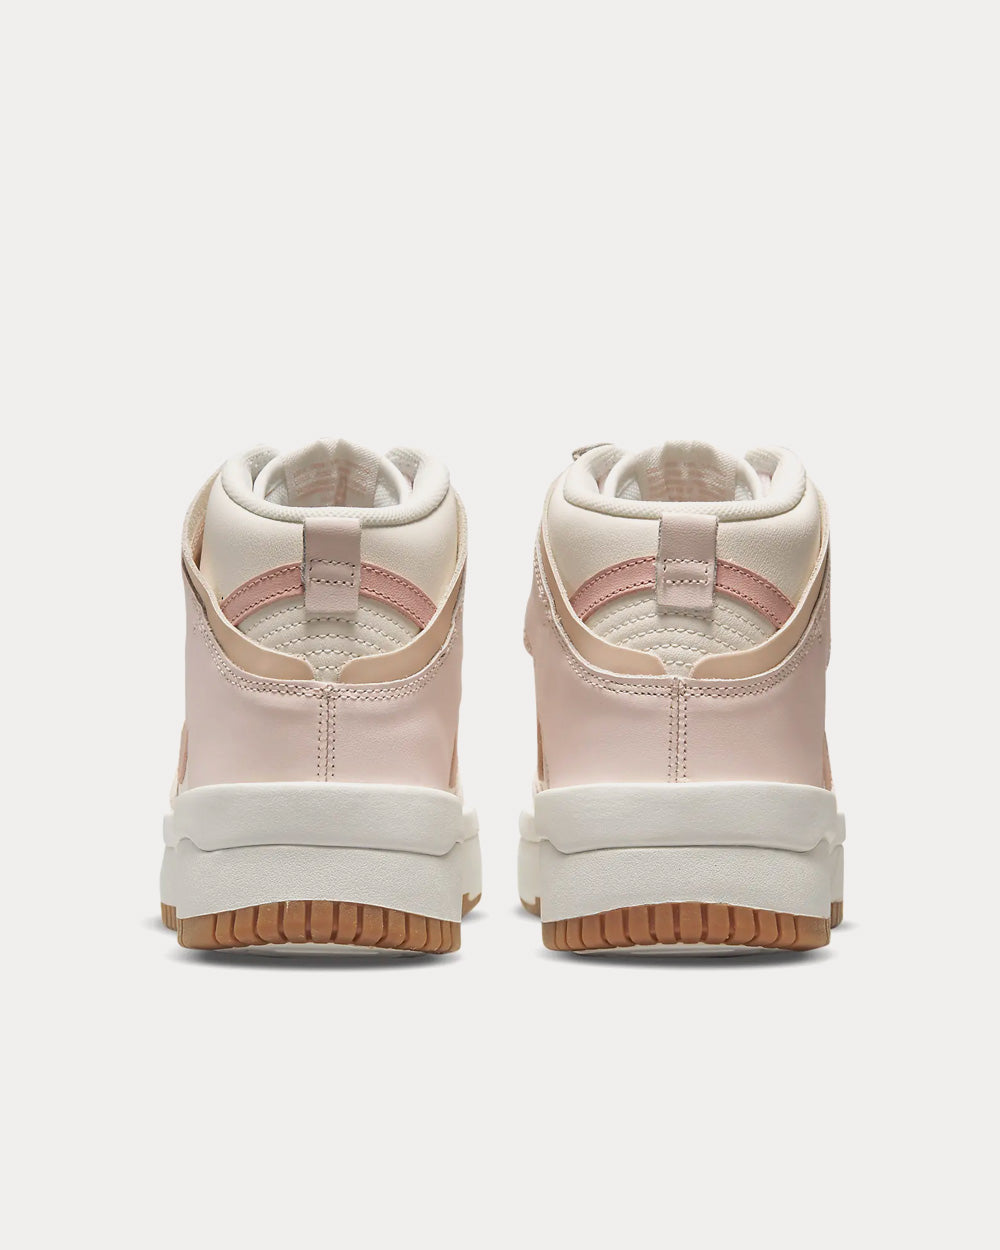 Nike Dunk High Up Sail / Light Soft Pink / Pearl White / Pink ...